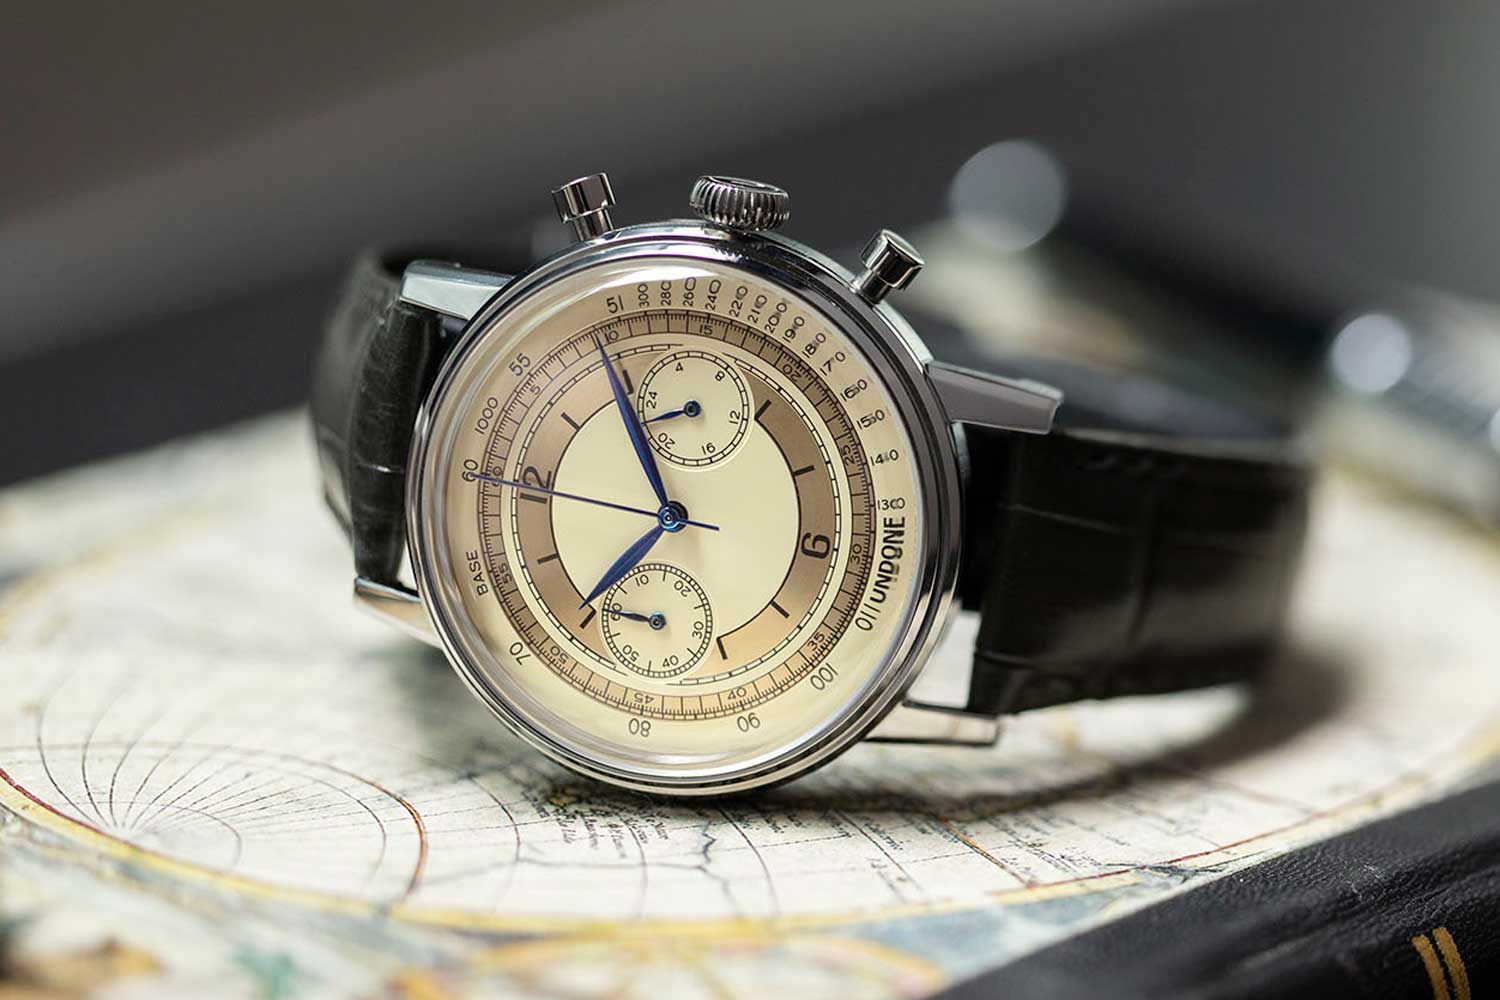 The UNDONE Vintage Chronograph for The Rake & Revolution featuring a vintage-inspired sector dial.